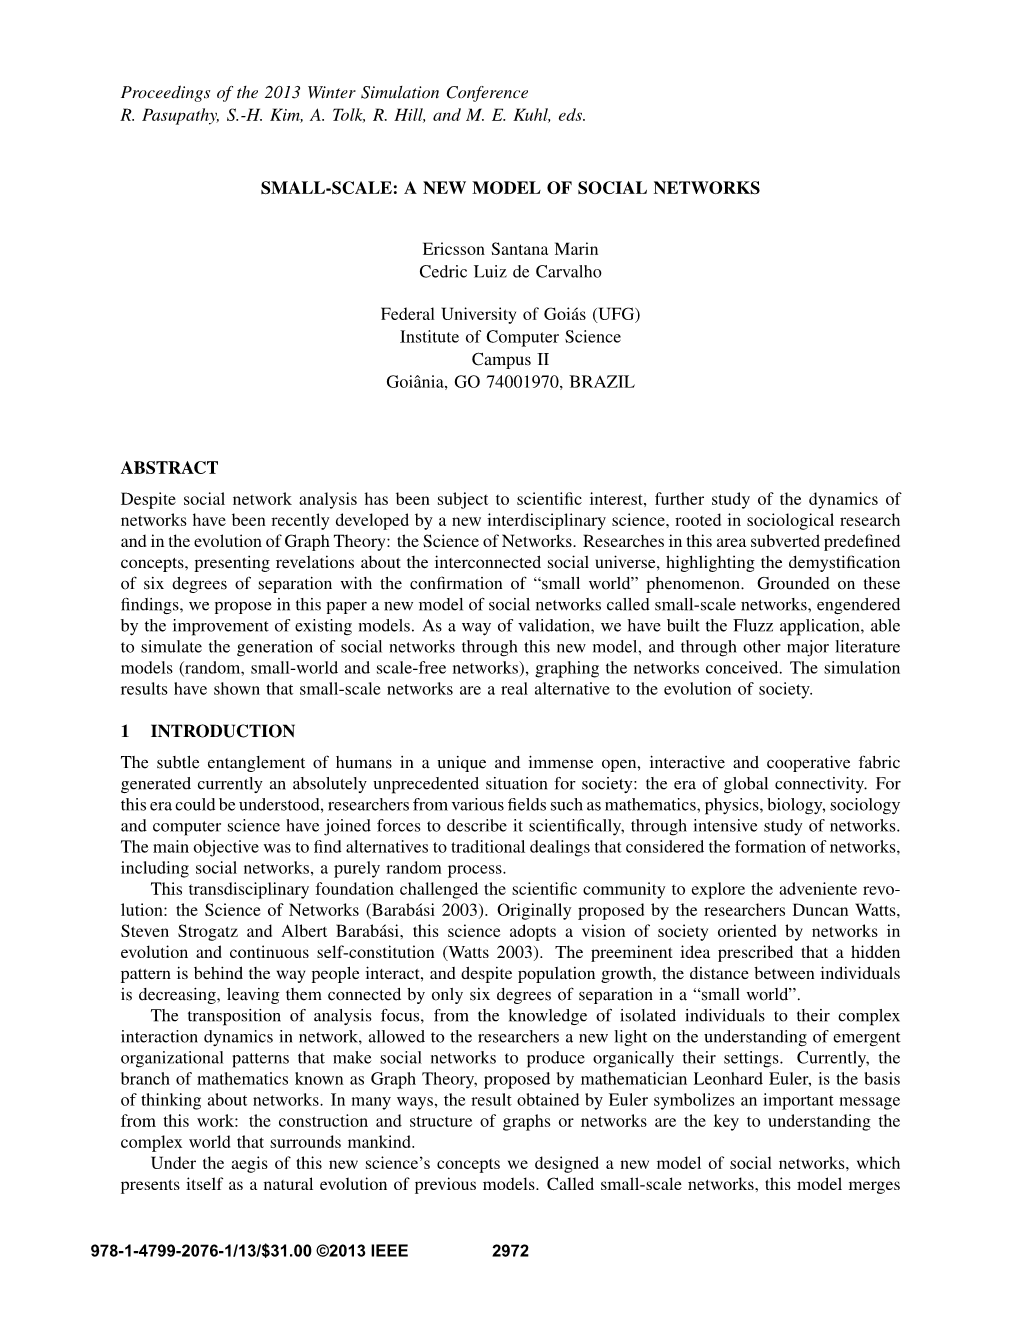 Small-Scale: a New Model of Social Networks